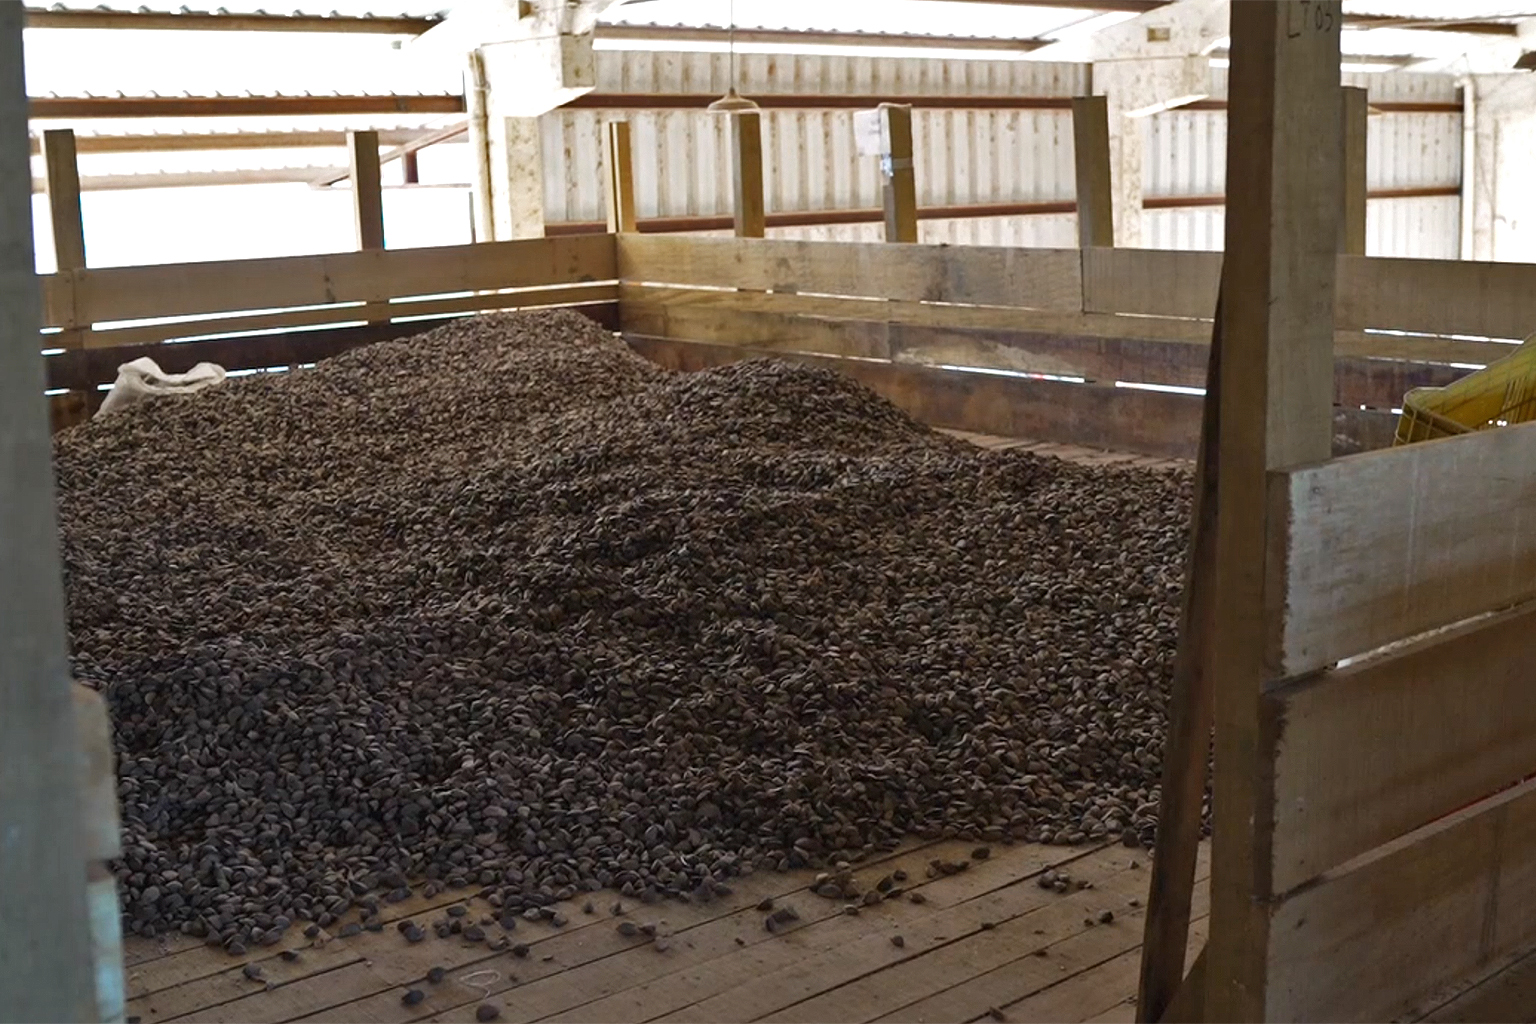 Large amounts of castanha at one of RECA’s warehouses. 